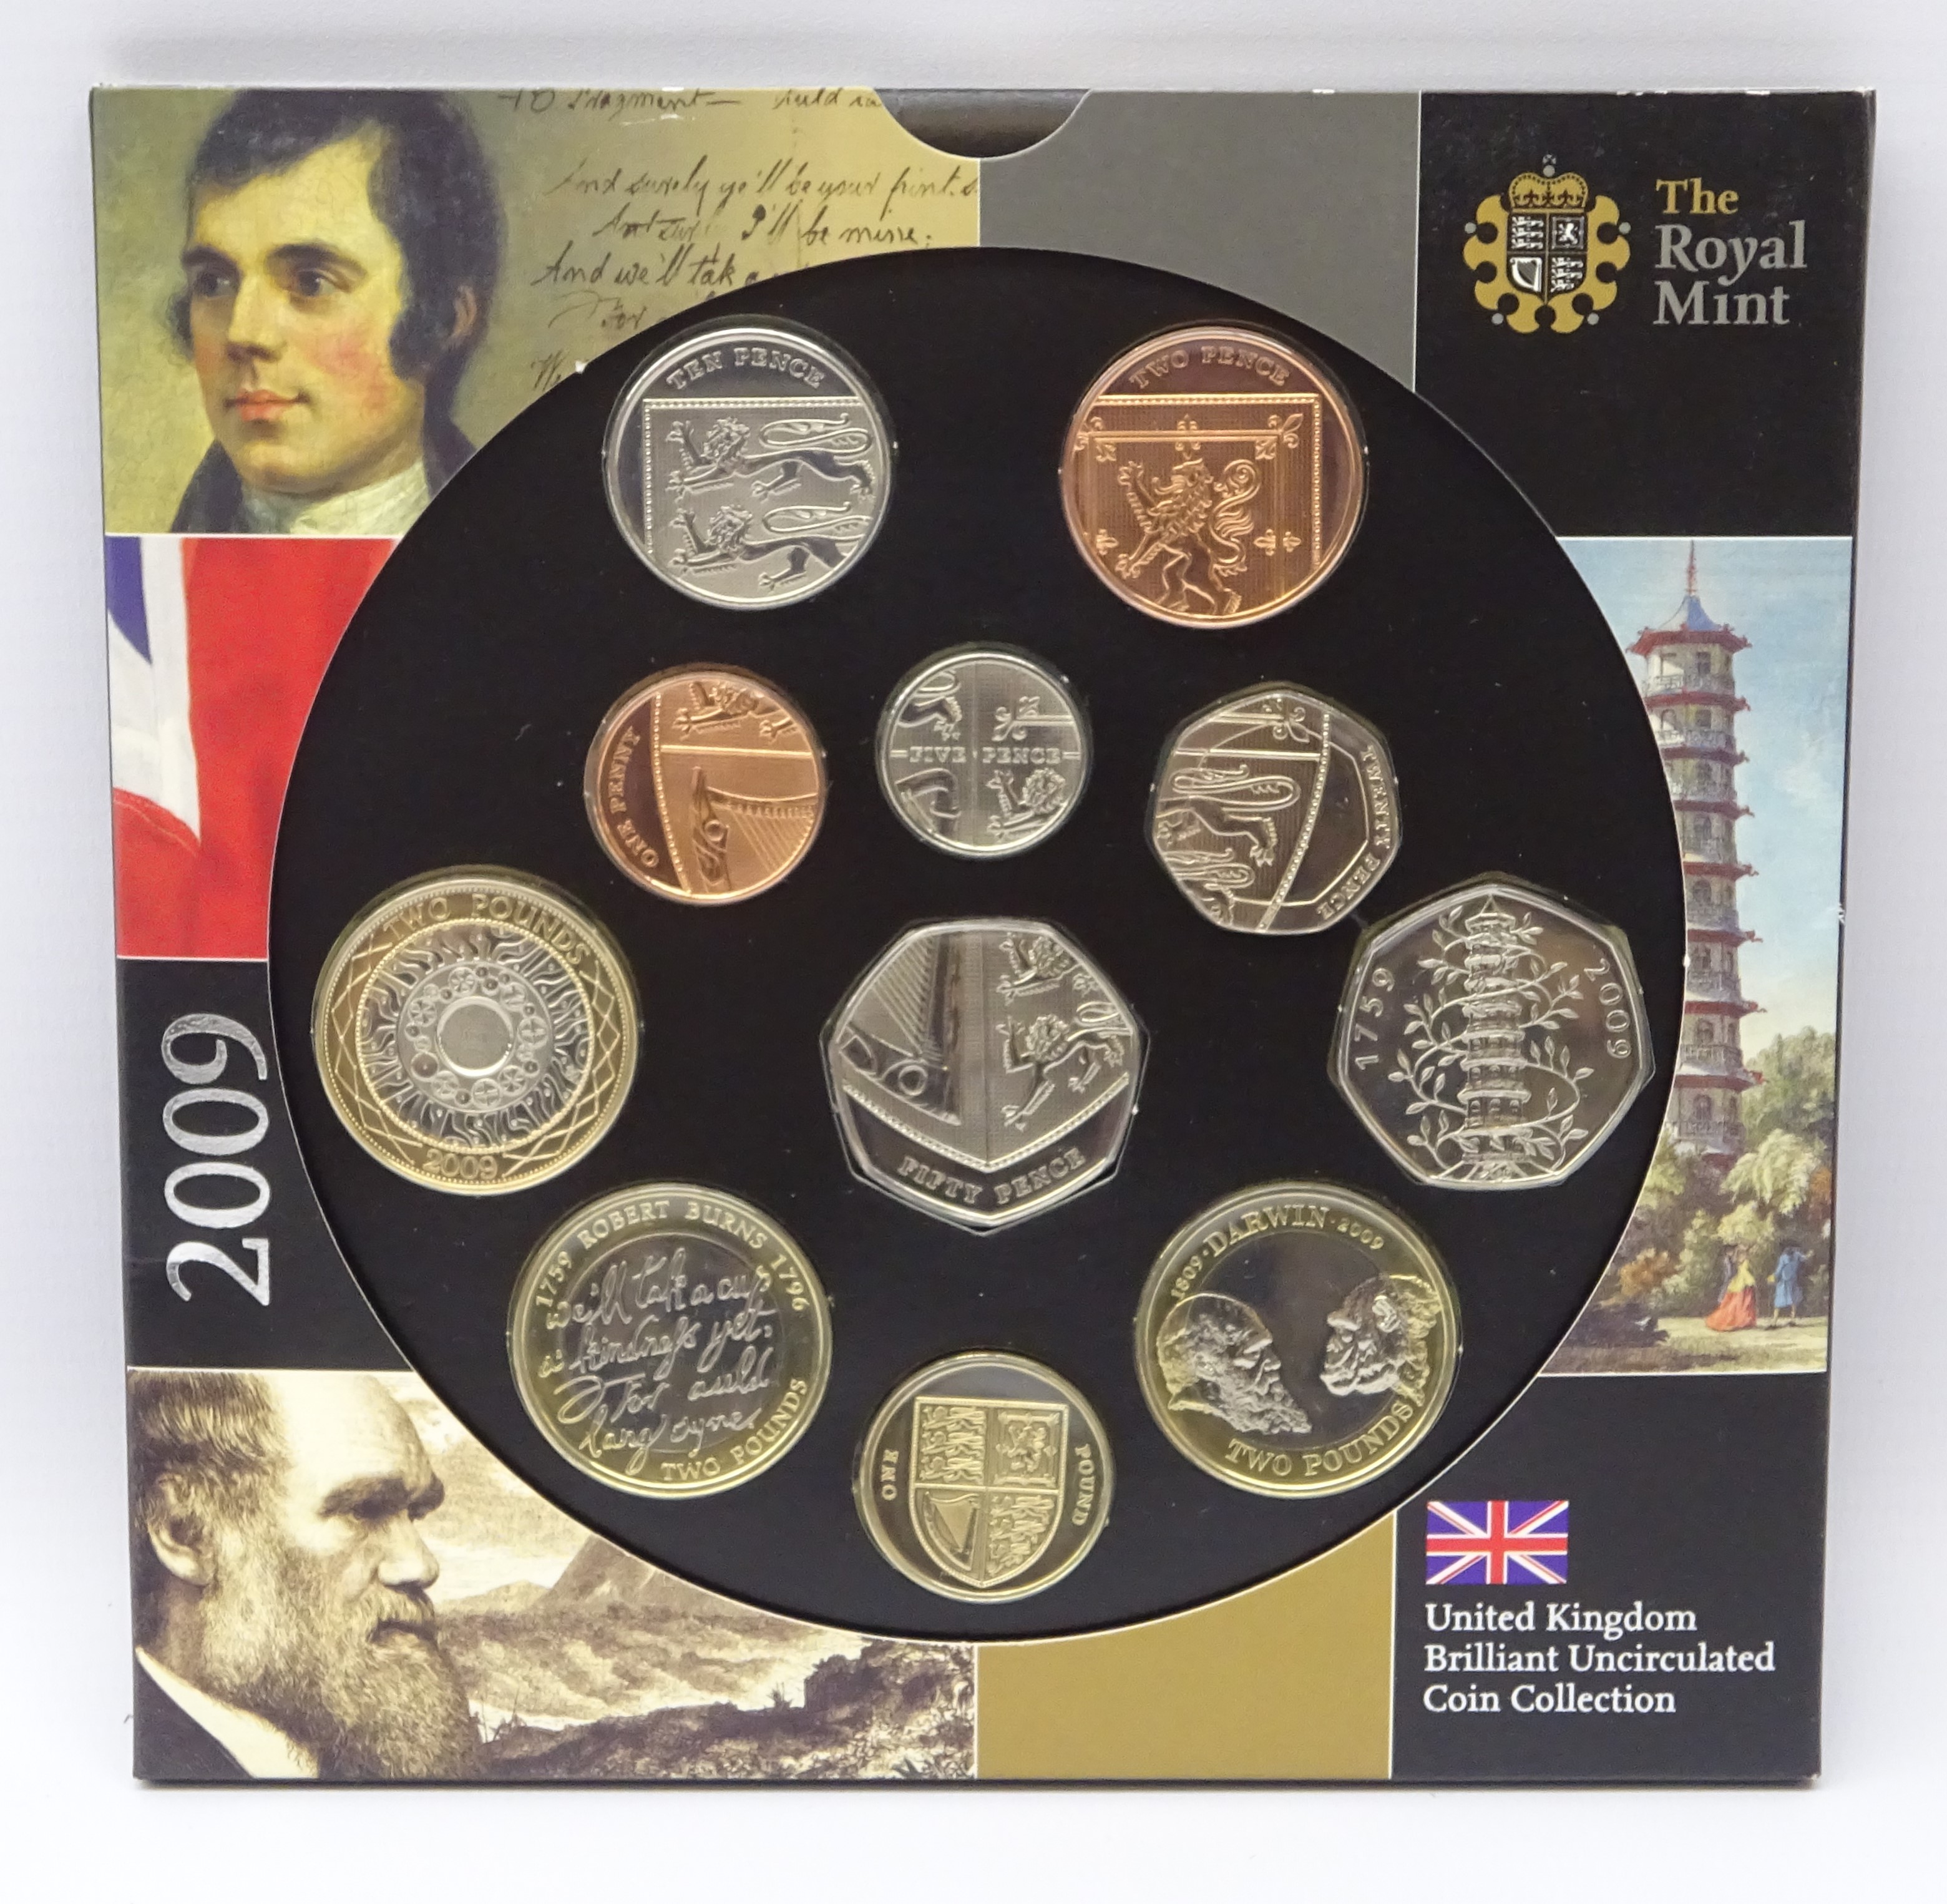 United Kingdom 2009 brilliant uncirculated coin collection,